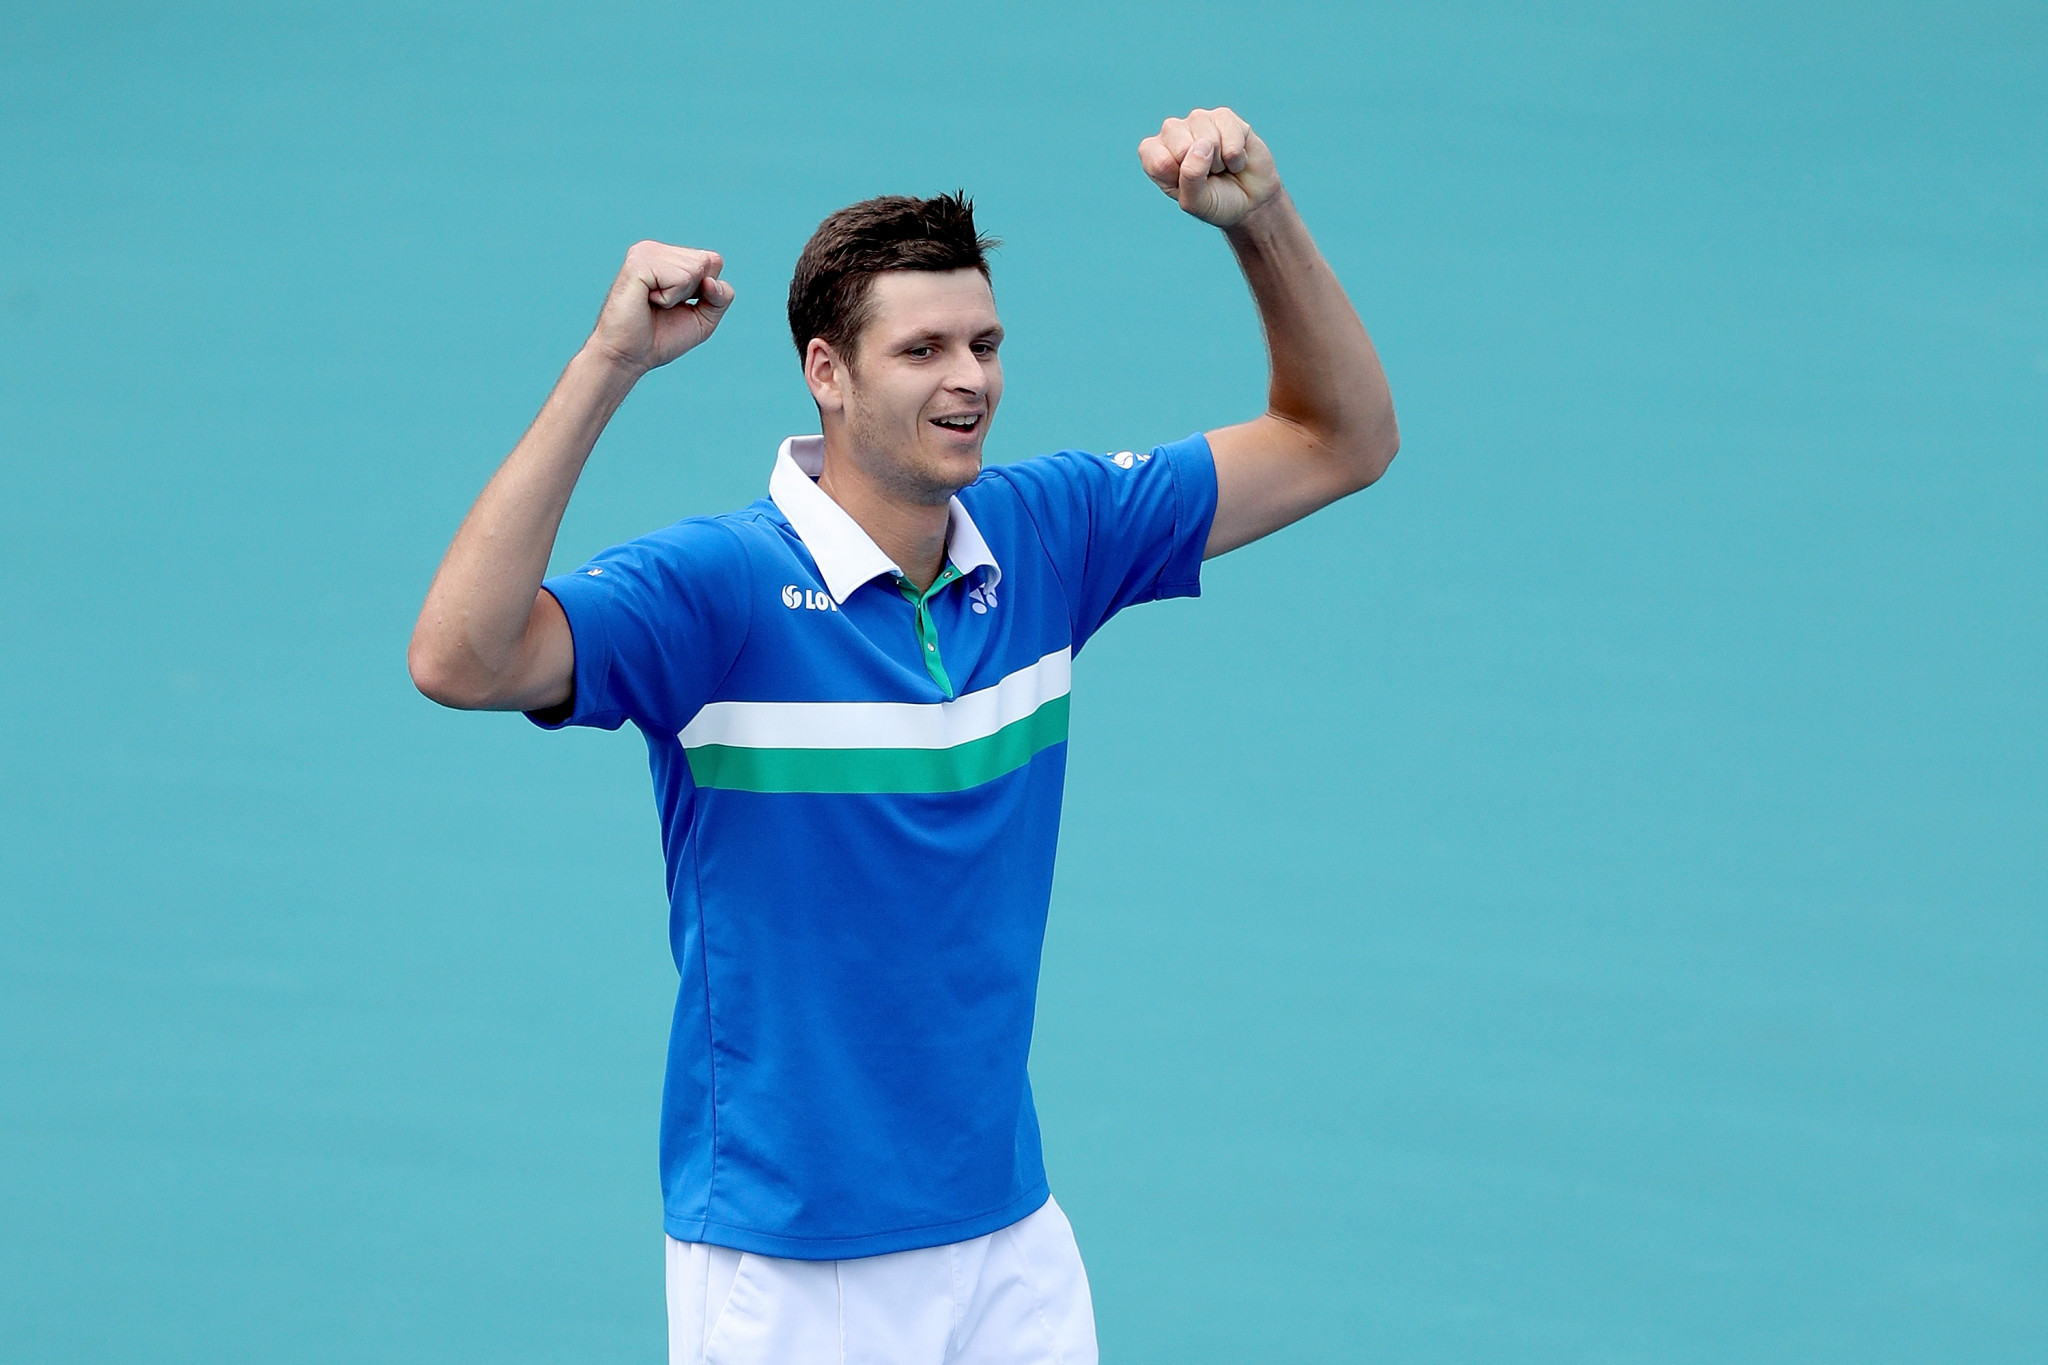 Hubert Hurkacz won the Miami Open in a straight sets match with Jannik Sinner ©Getty Images